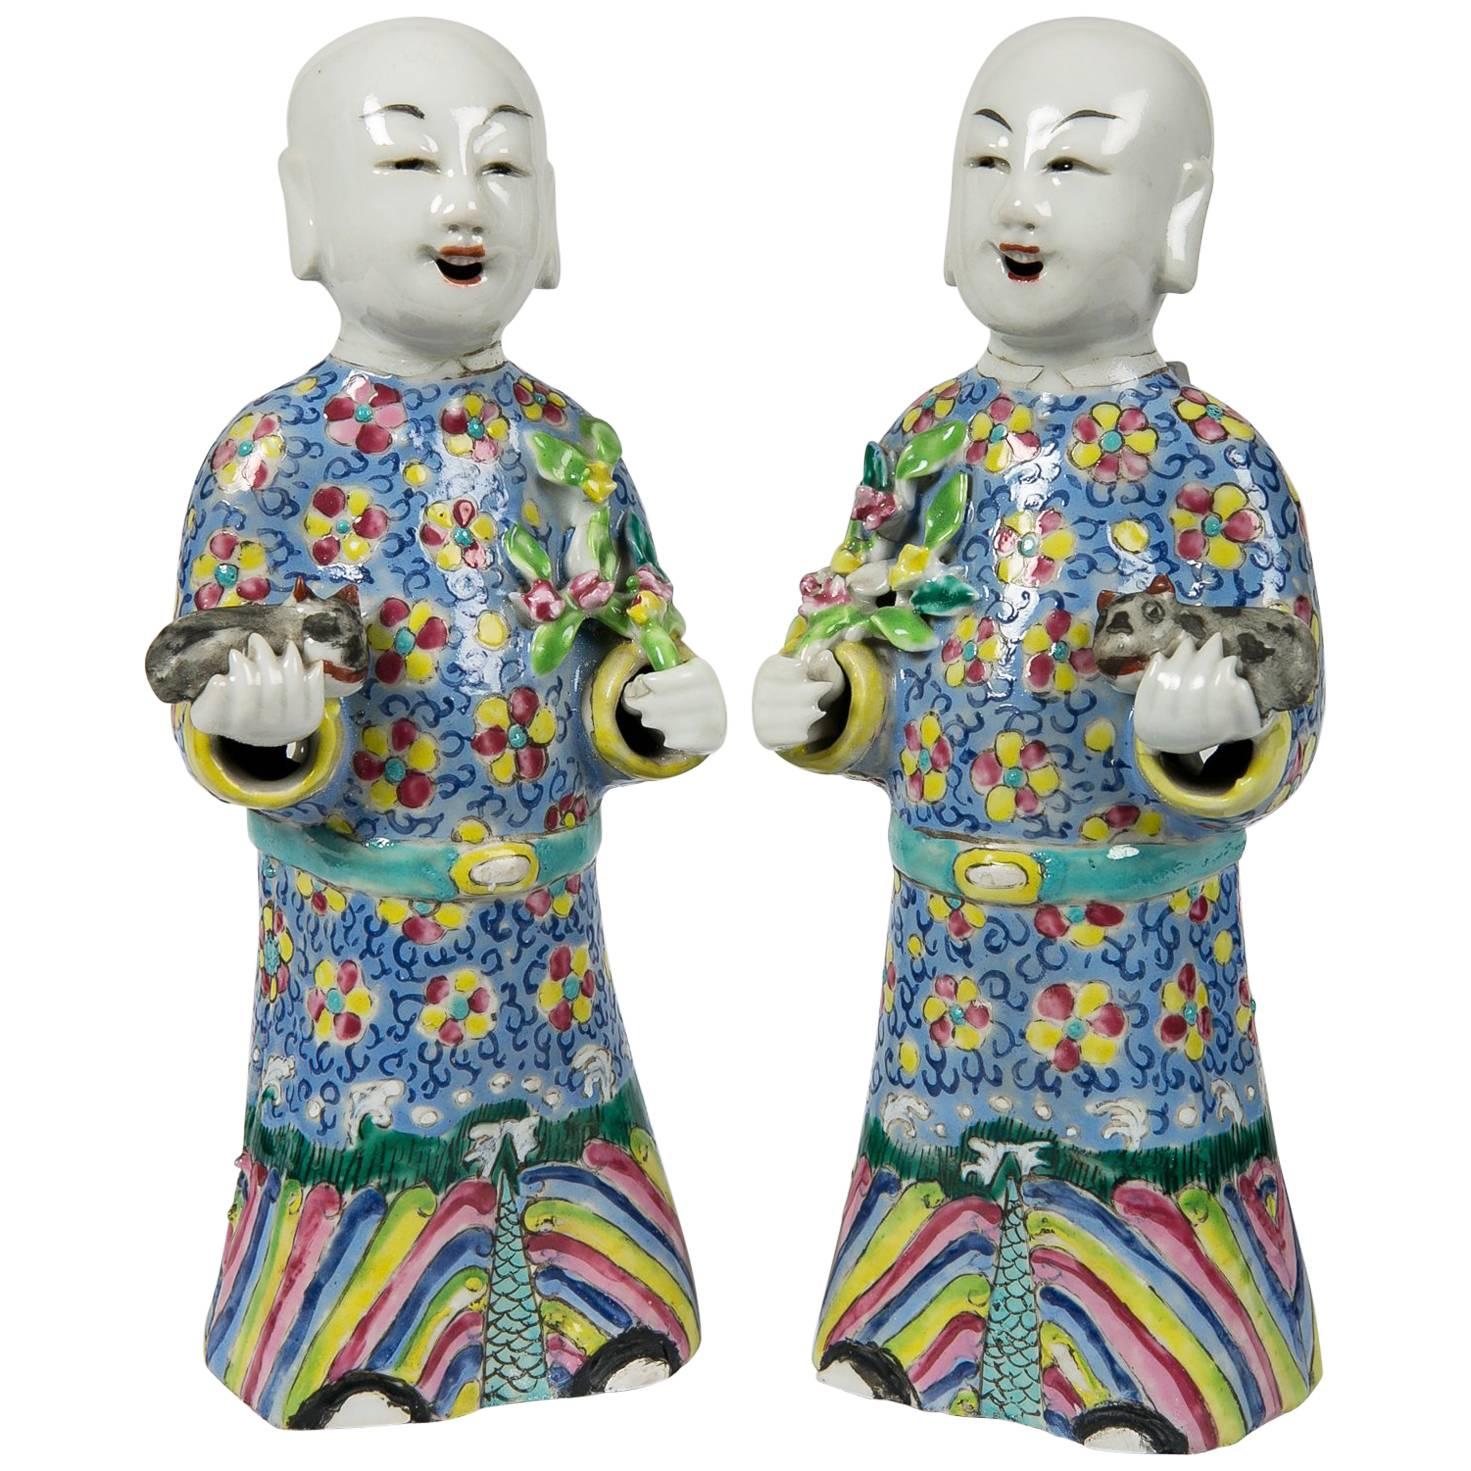 Pair of Chinese Porcelain Figures of Court Ladies